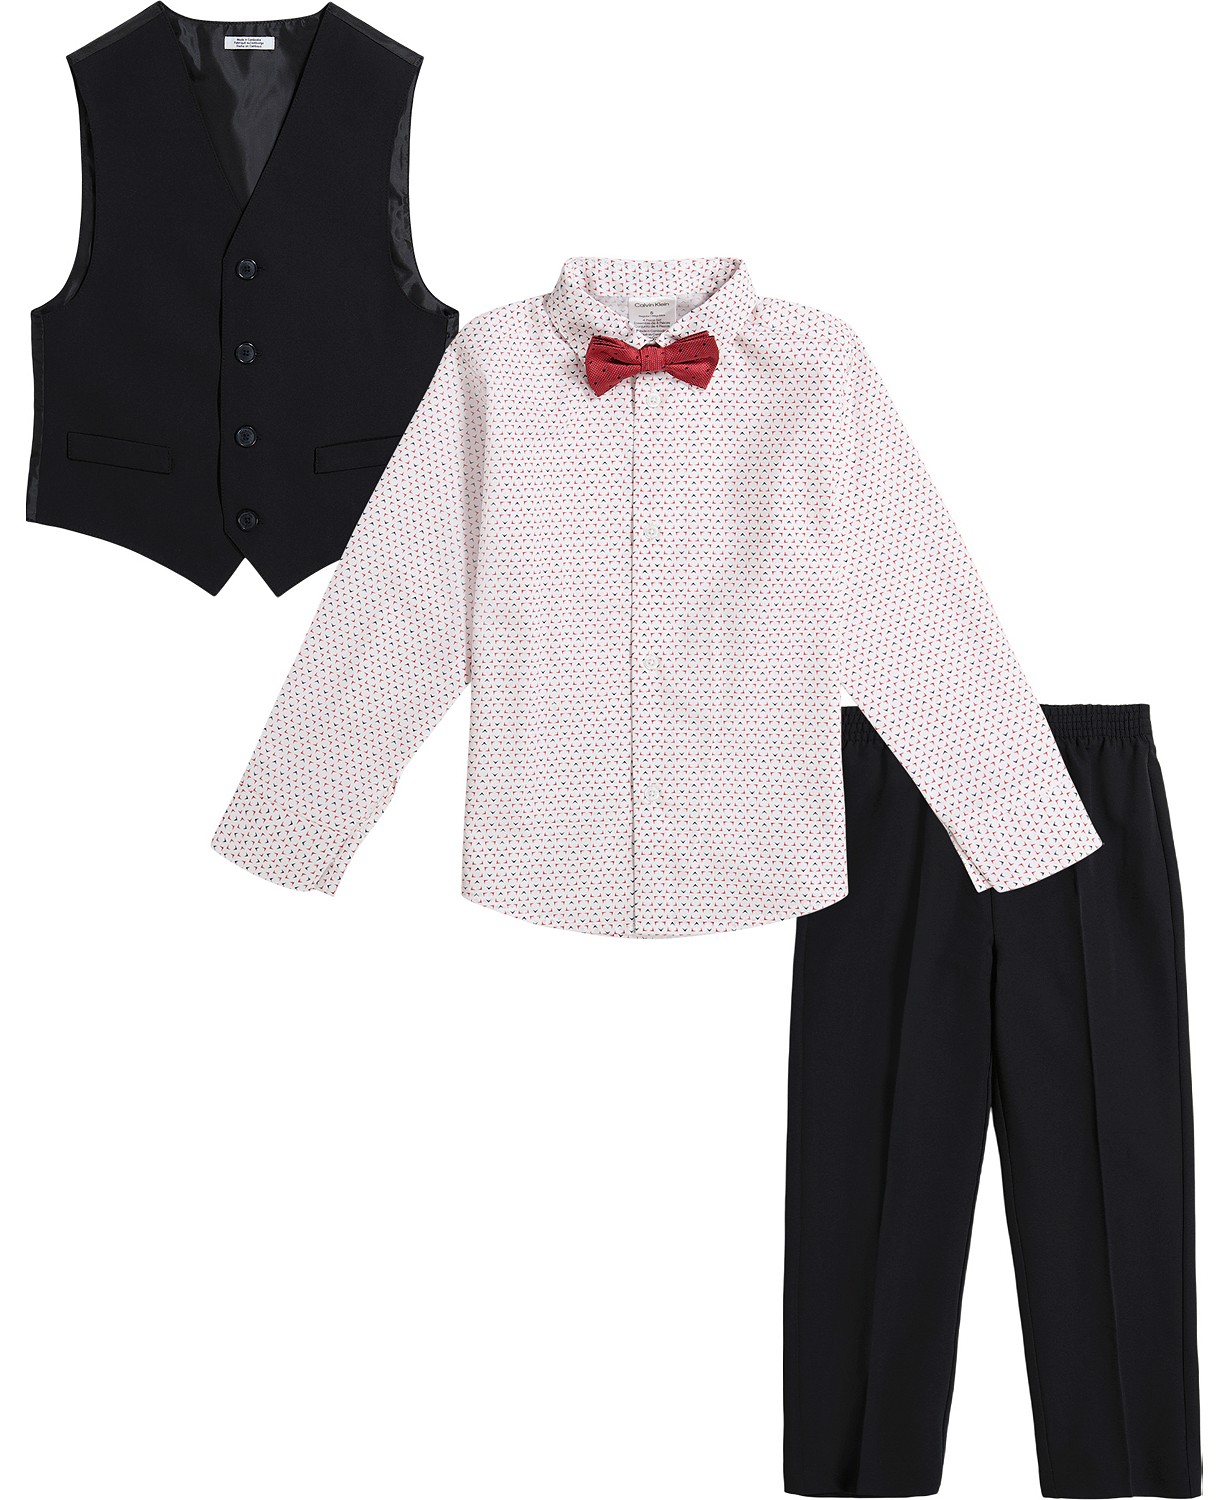 Toddler Boys Stretch Performance Vest Pants Shirt and Bow Tie 4-Piece Set